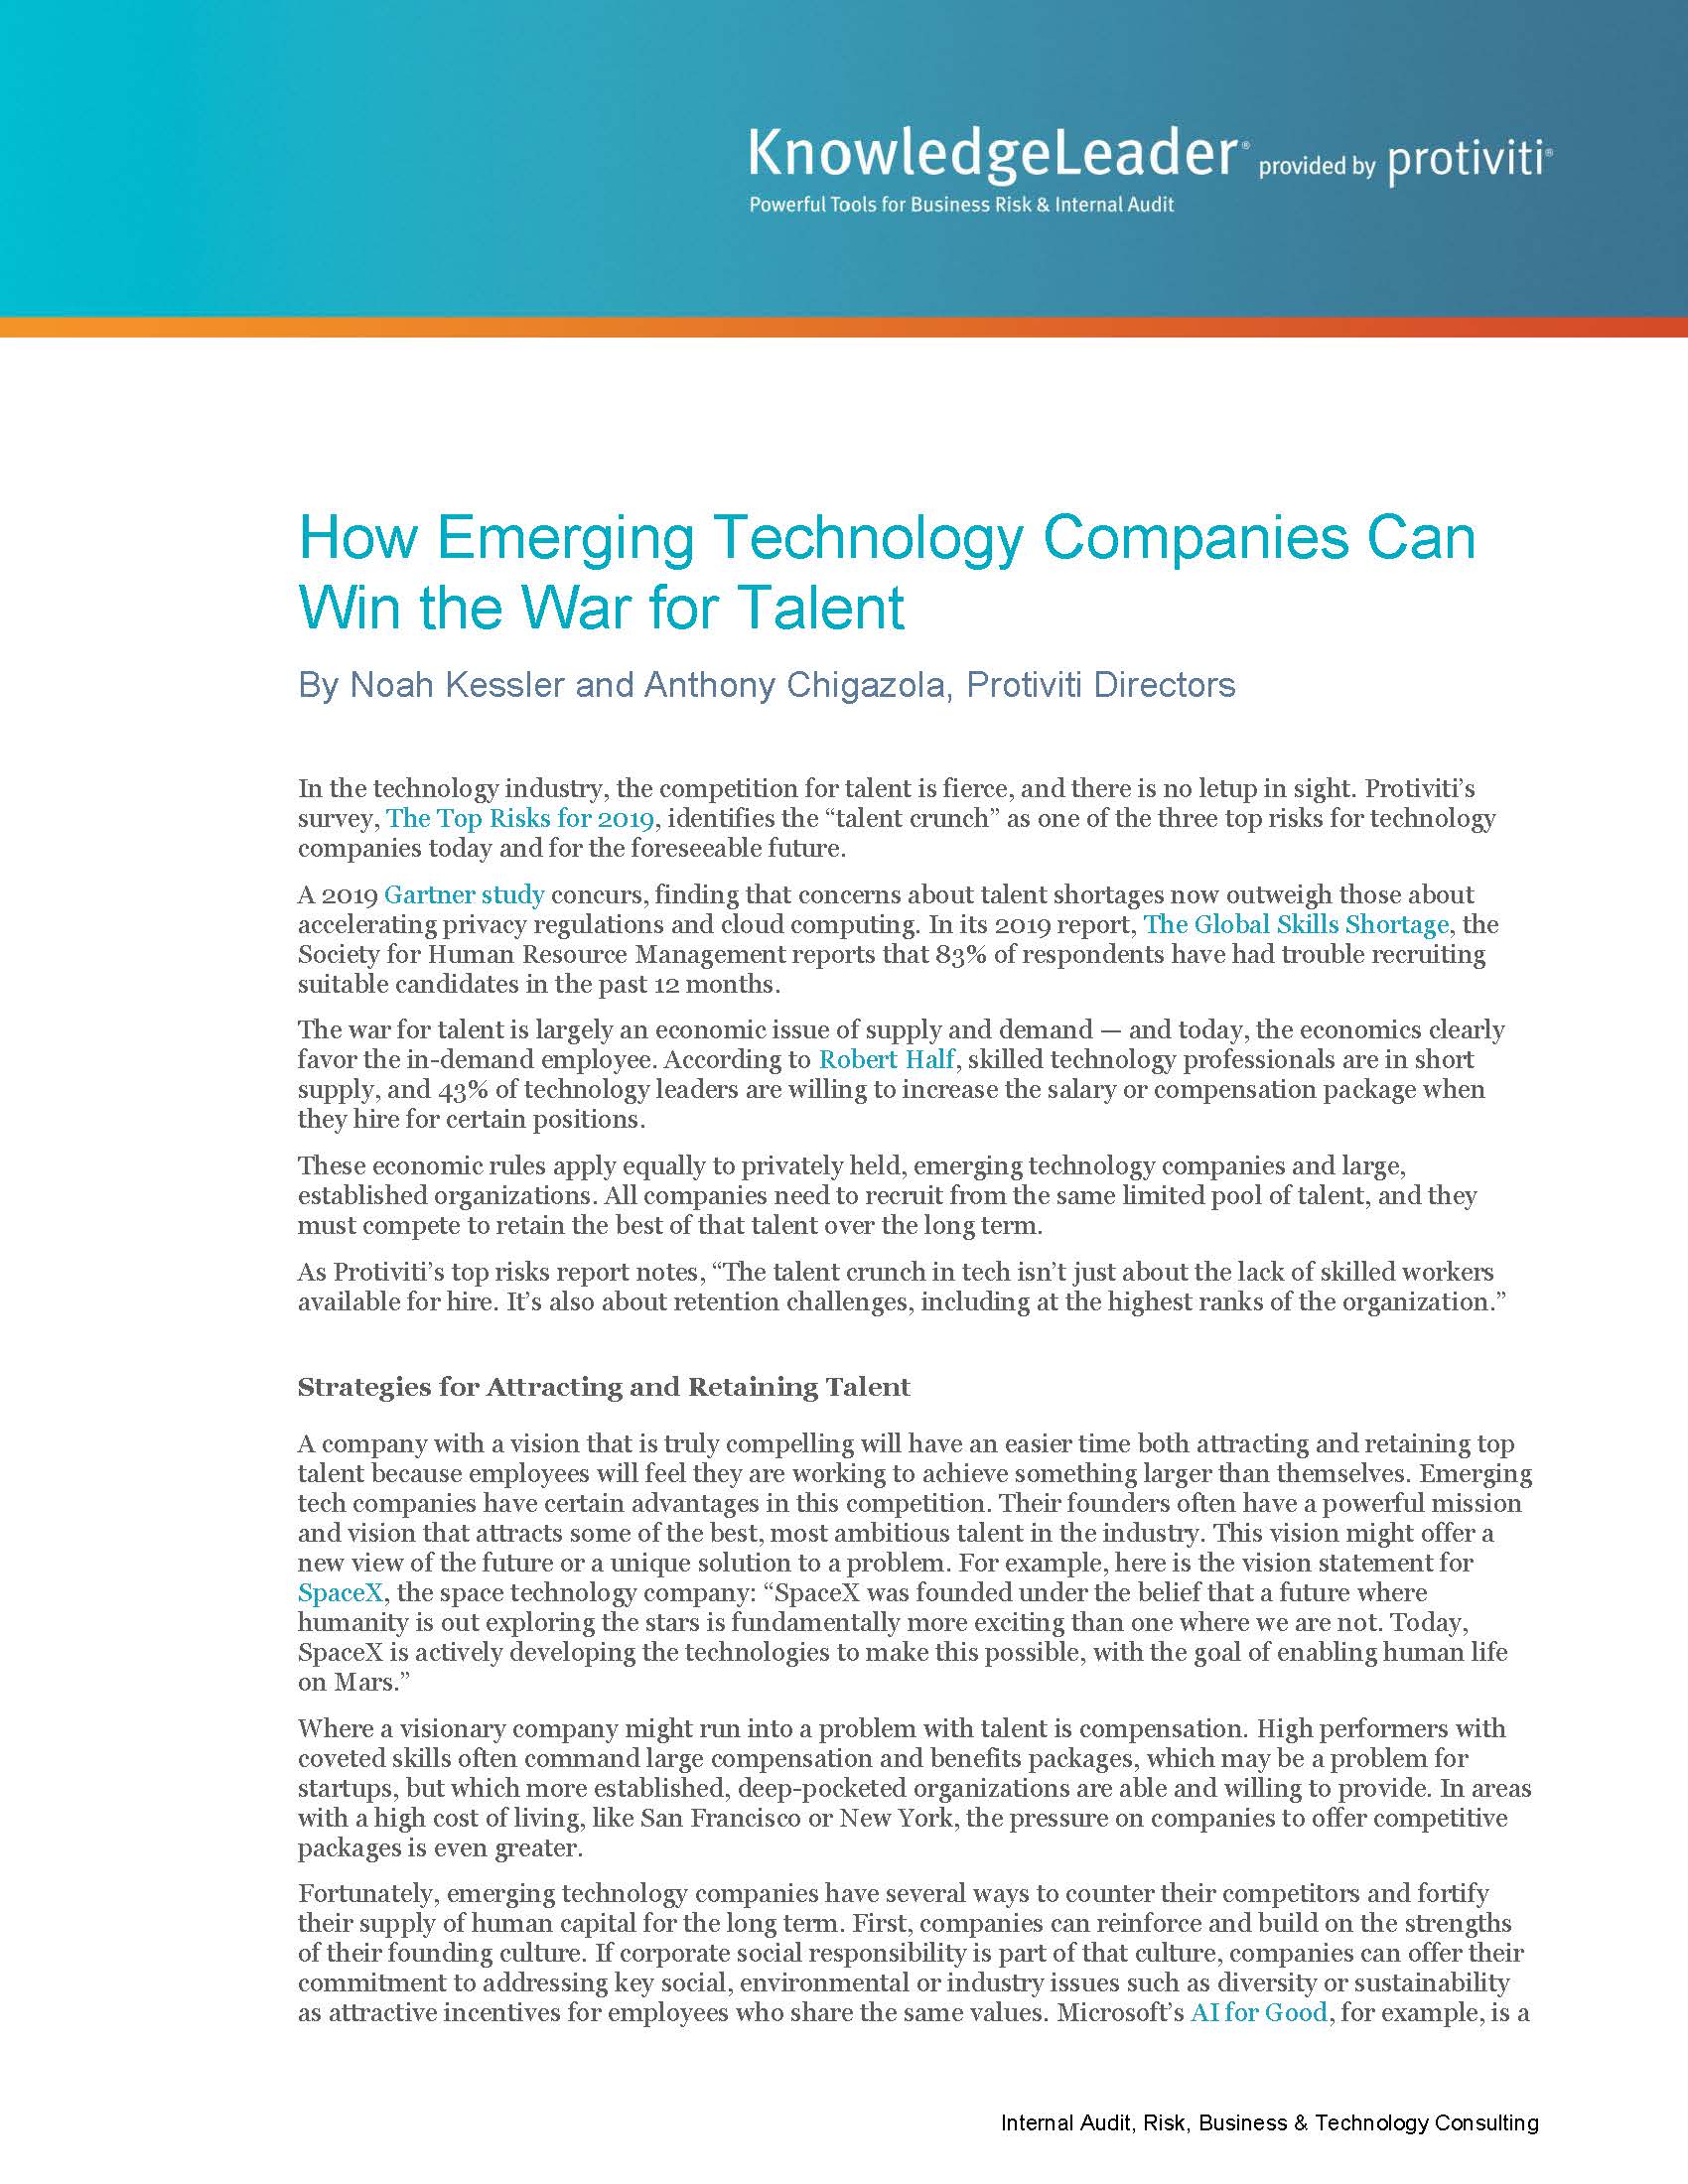 Screenshot of the first page of How Emerging Technology Companies Can Win the War for Talent